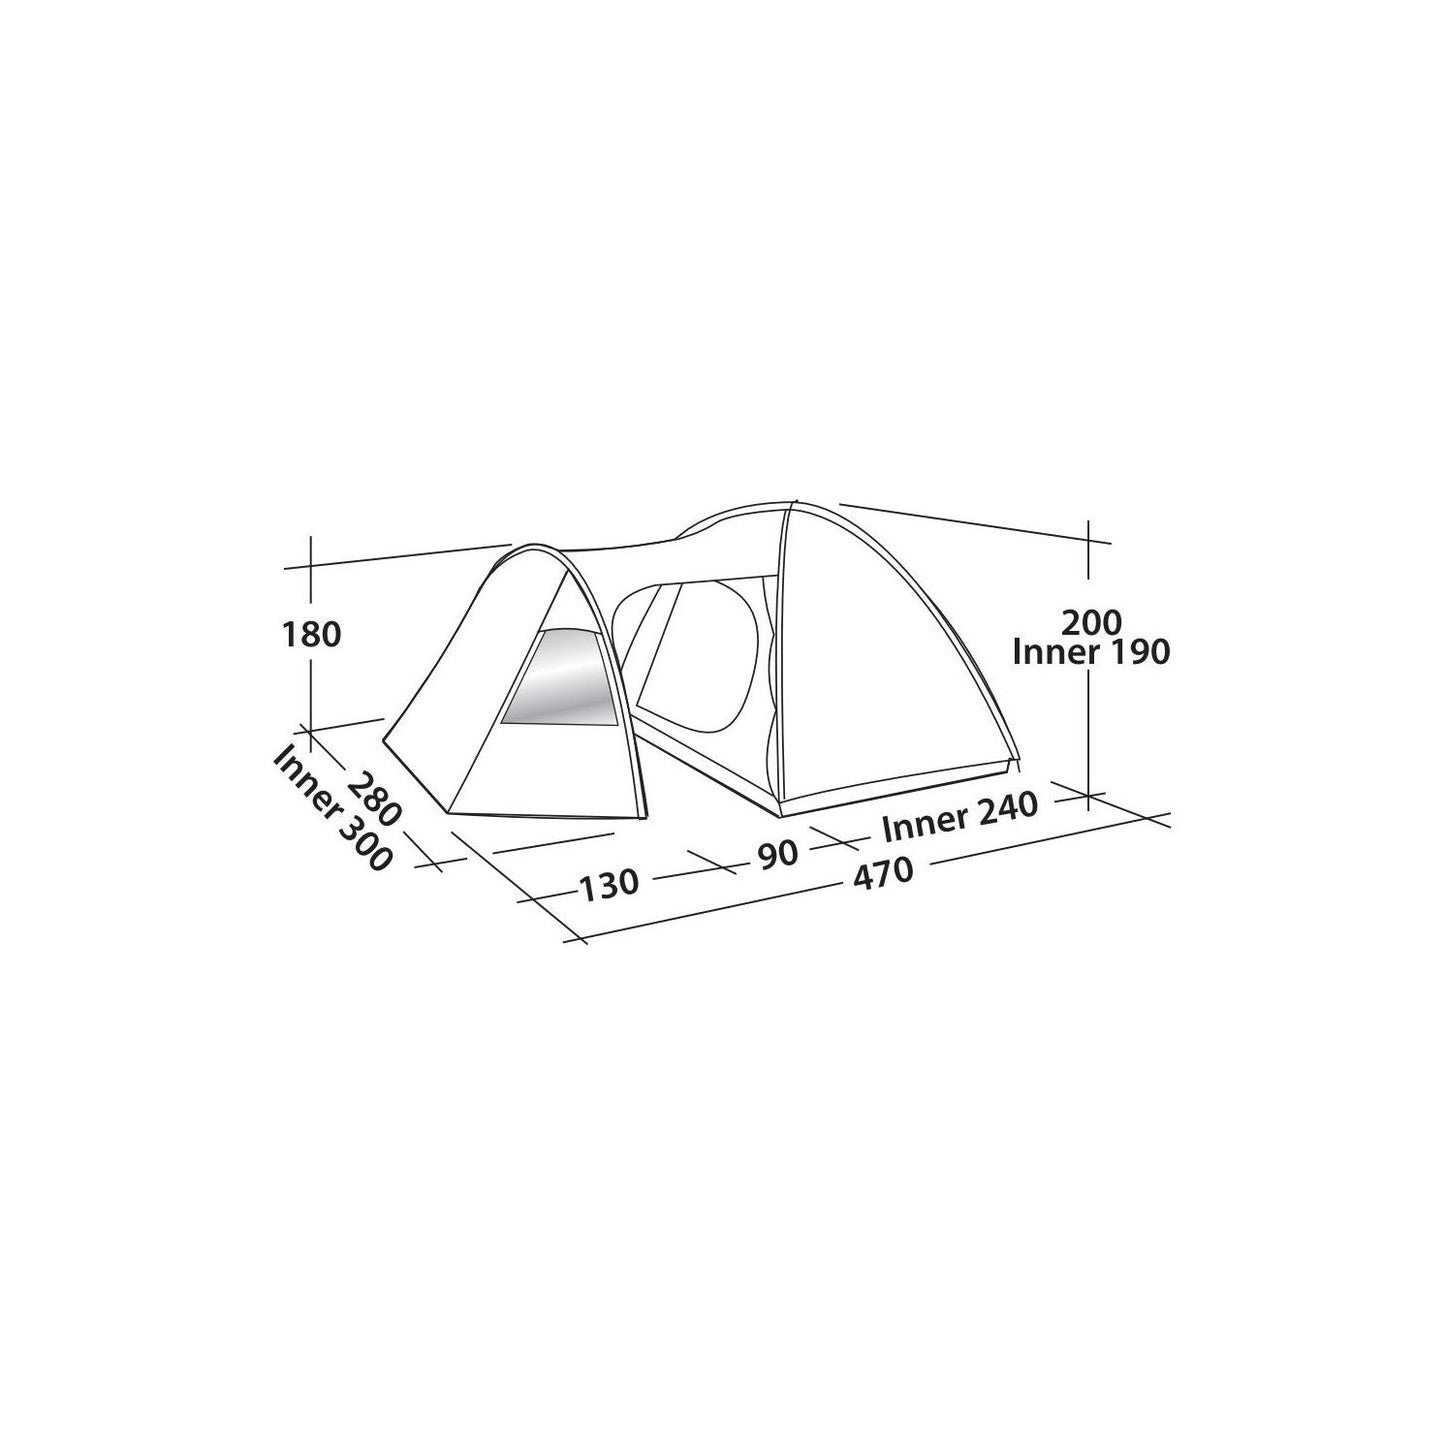 Easy Camp Eclipse 500 tent